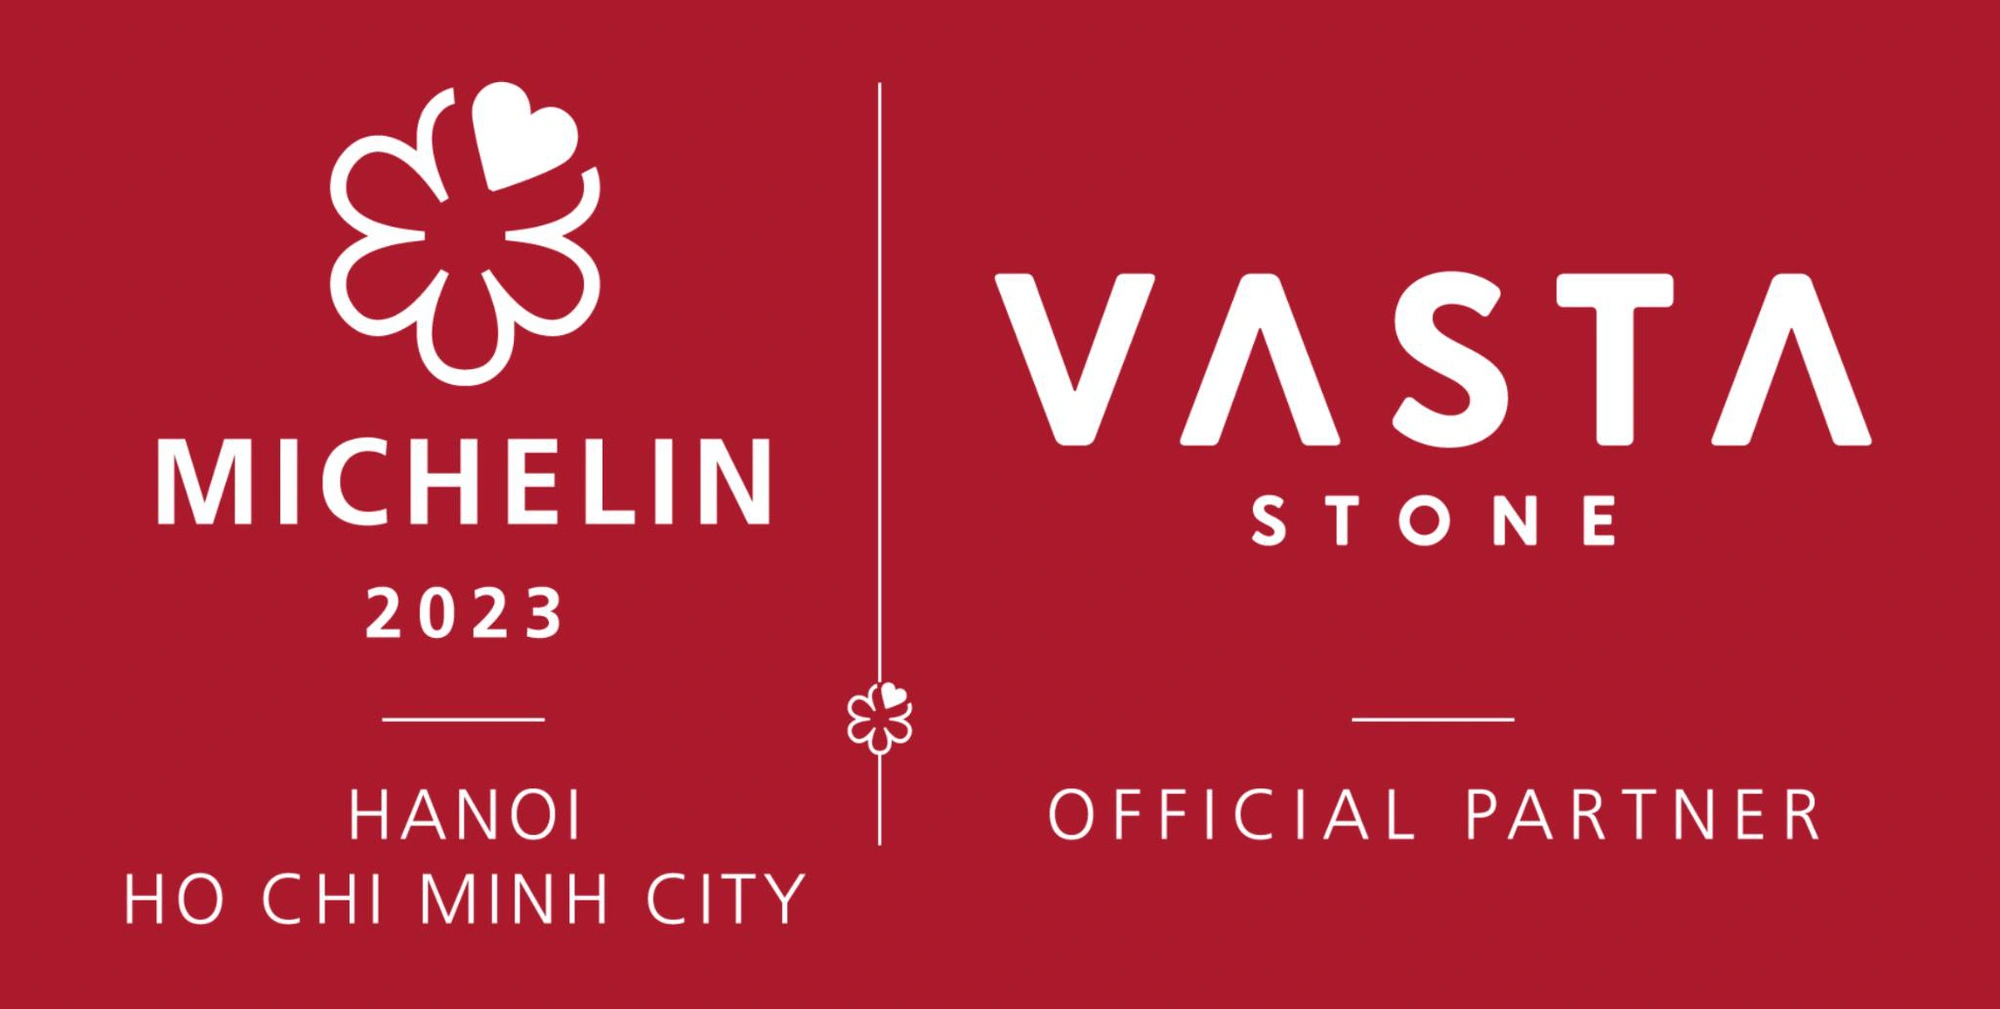 Vasta Stone Presents an Exquisite Culinary Symphony in Partnership with the MICHELIN Guide Hanoi & Ho Chi Minh City.